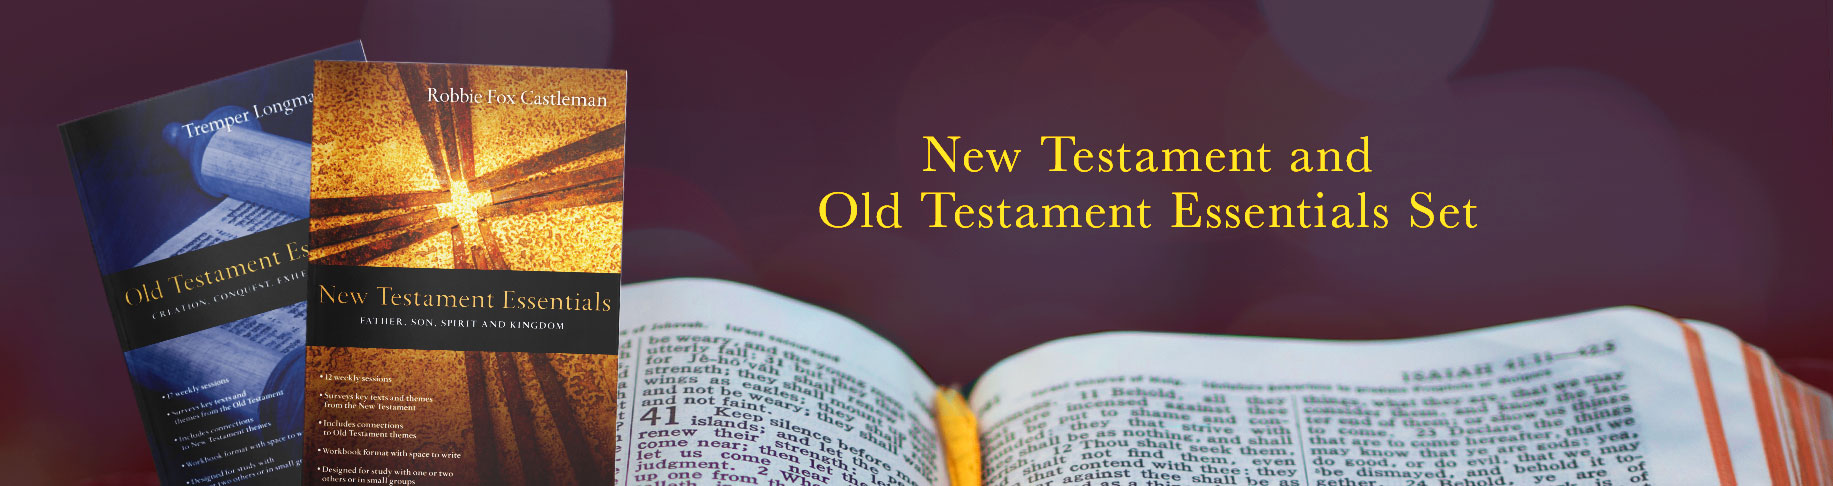 Old and New Testament Essentials Set